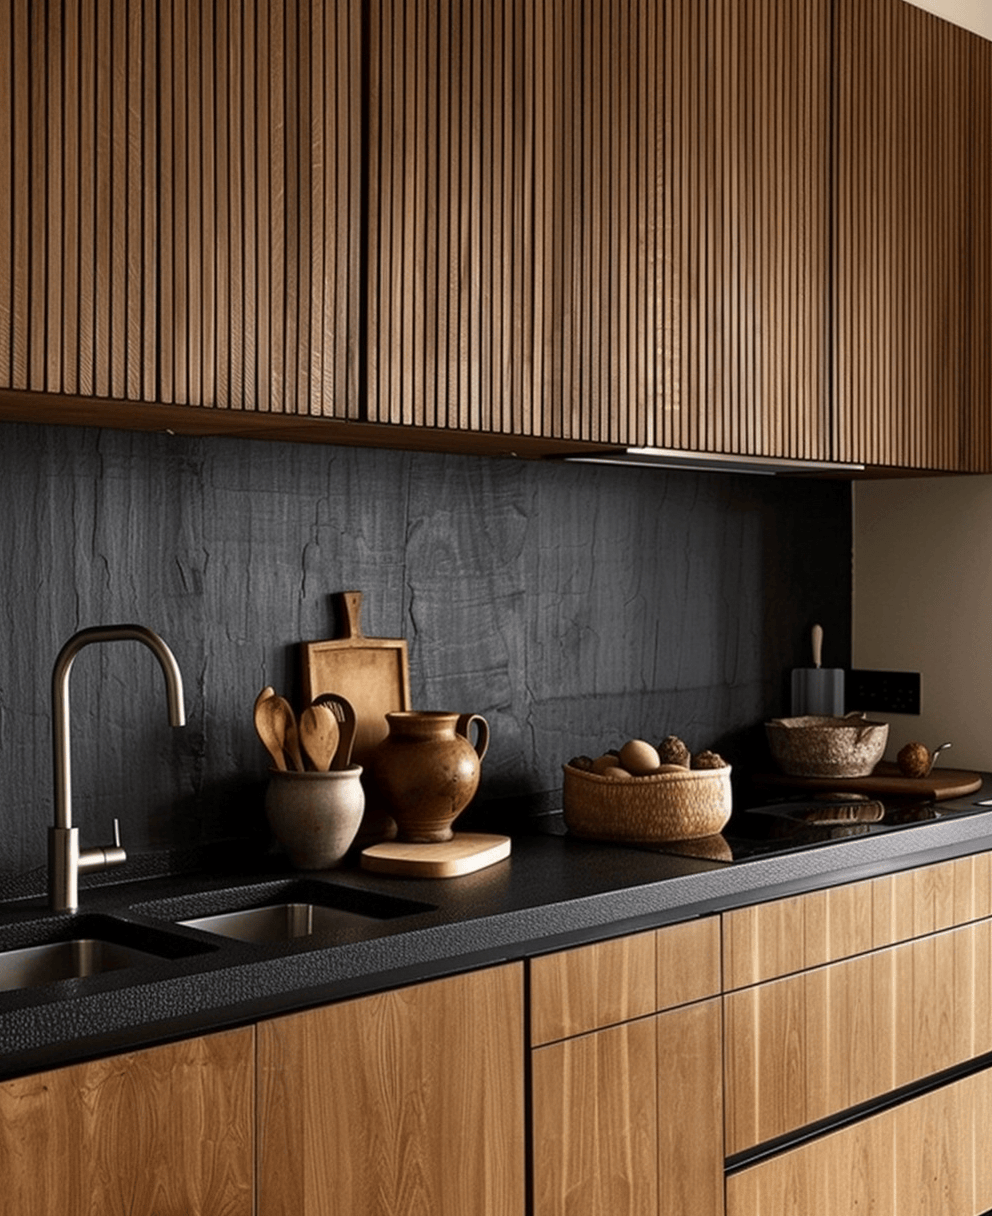 Perfect cultural blend in Japandi kitchen themes with Scandinavian and Japanese elements